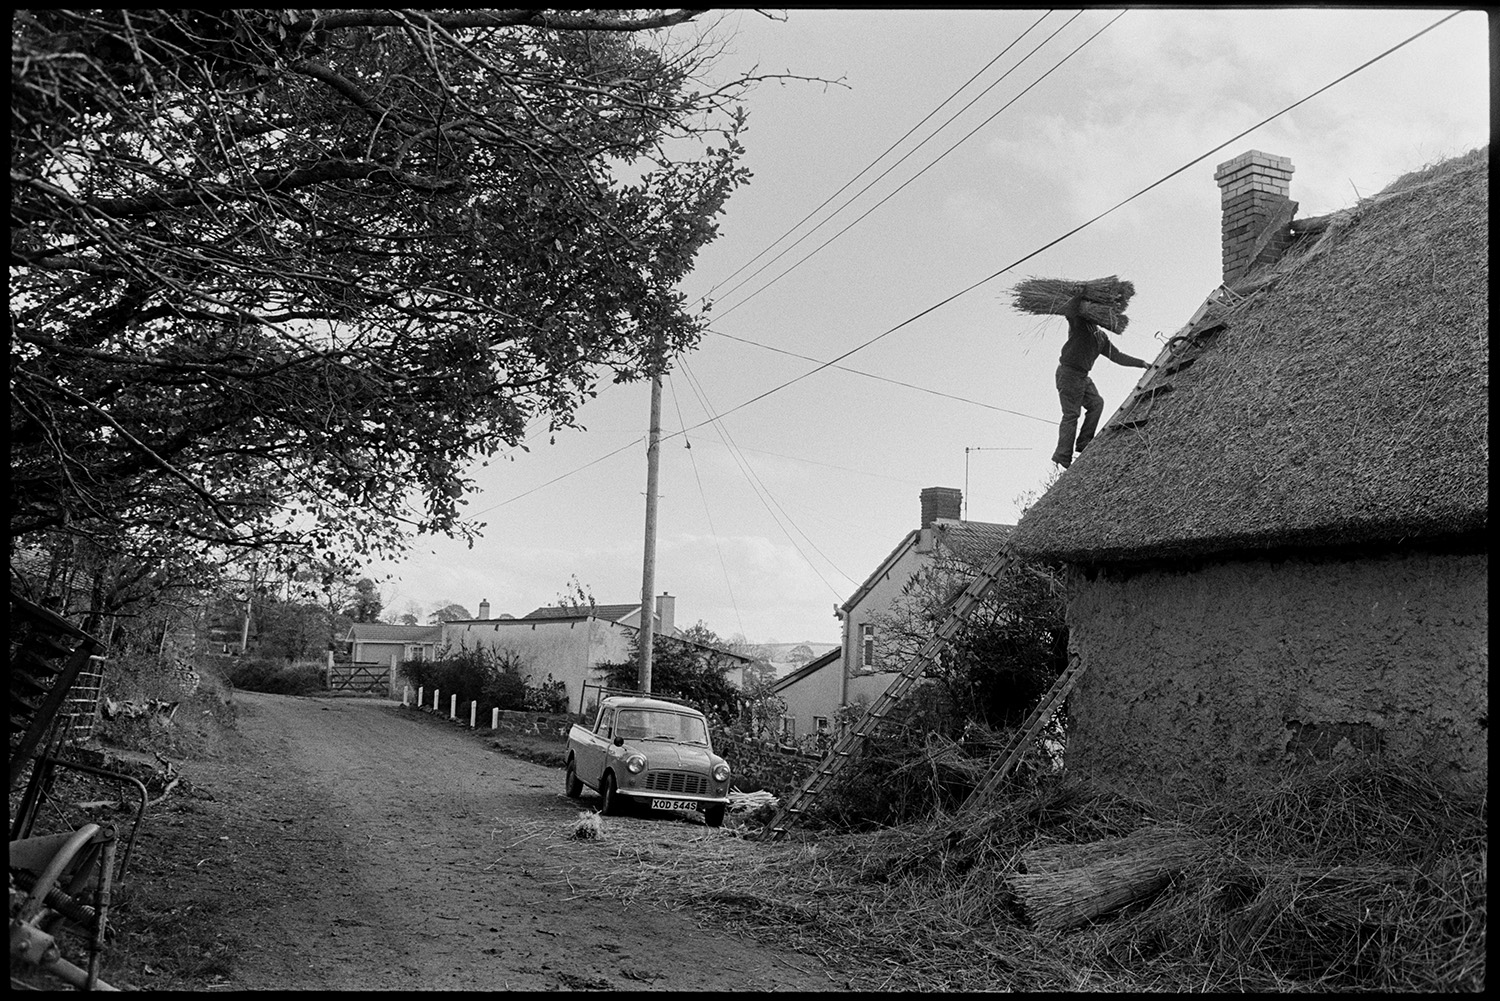 Thatcher working in village and talking to farmer. 
[Stanley Cole thatching a cottage roof in Upcott, Dolton. He is climbing a ladder holding bundles of thatching reed. A pile of reed is by the house wall and a truck is parked on the road.]